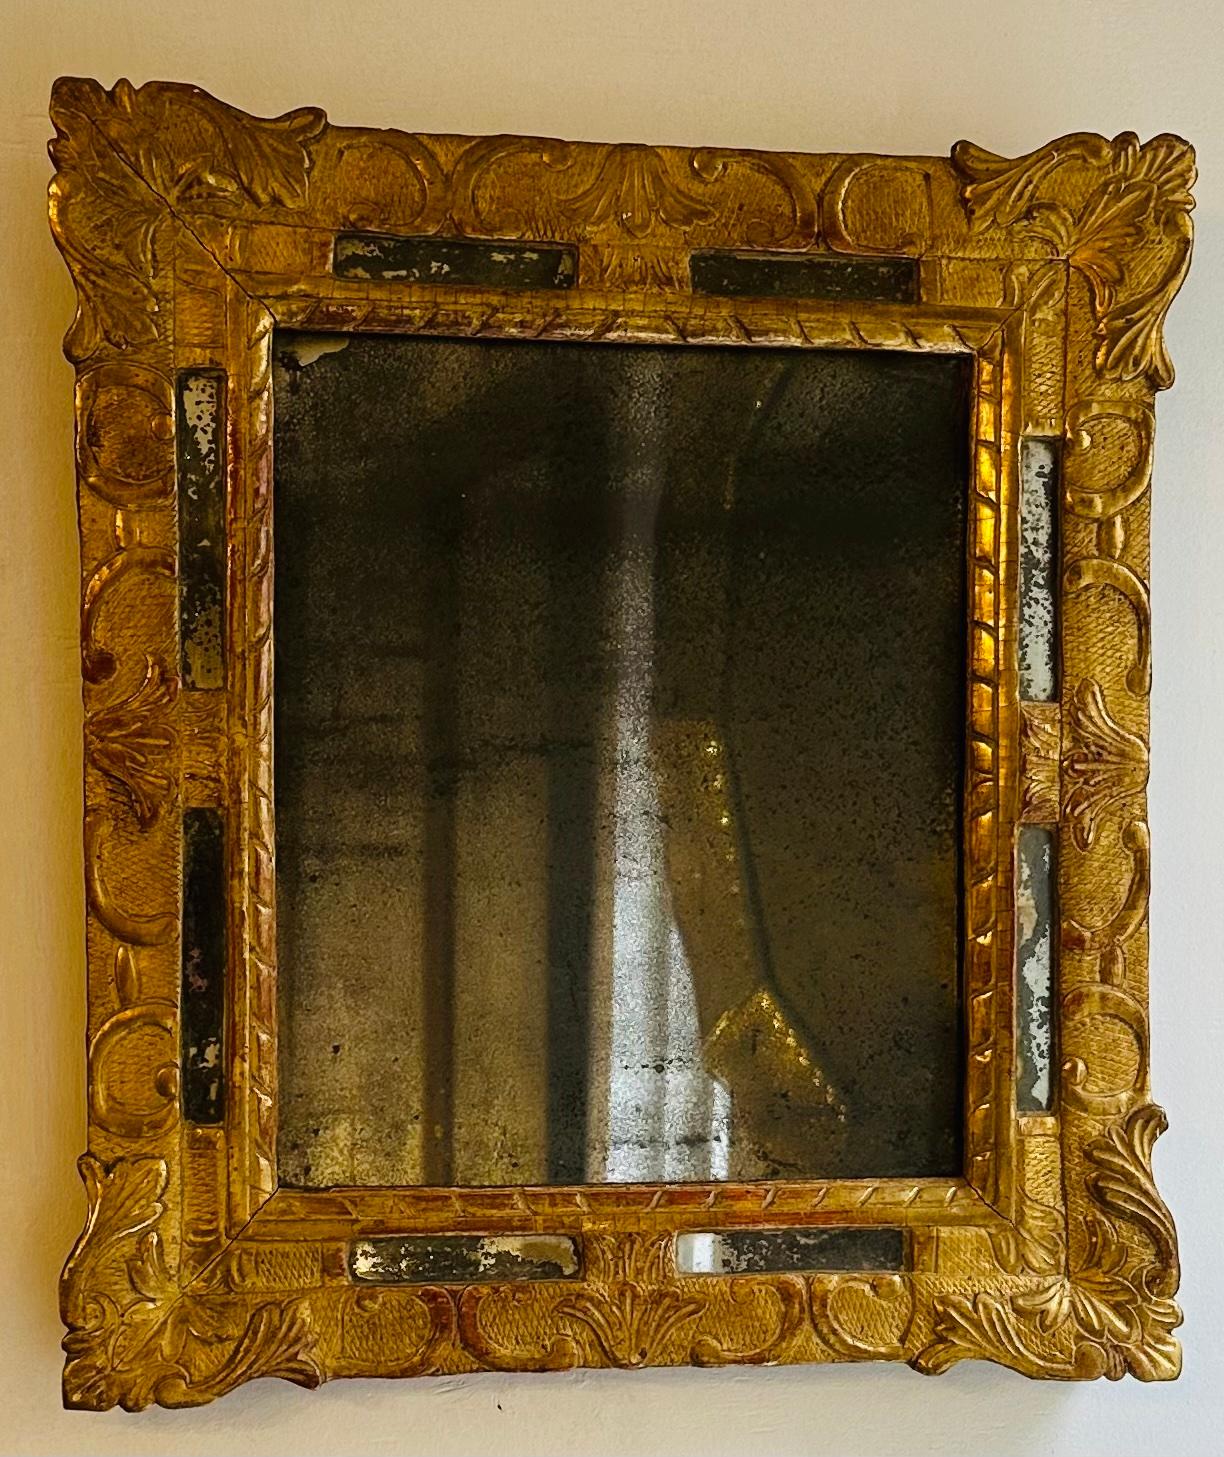 An original French mid-eighteenth century parcel gilt mirror with its original glass.  The gilded wooden frame features foliage decoration and eight cartouches of smaller rectangular mirror (two on each side) set within it to further enhance its